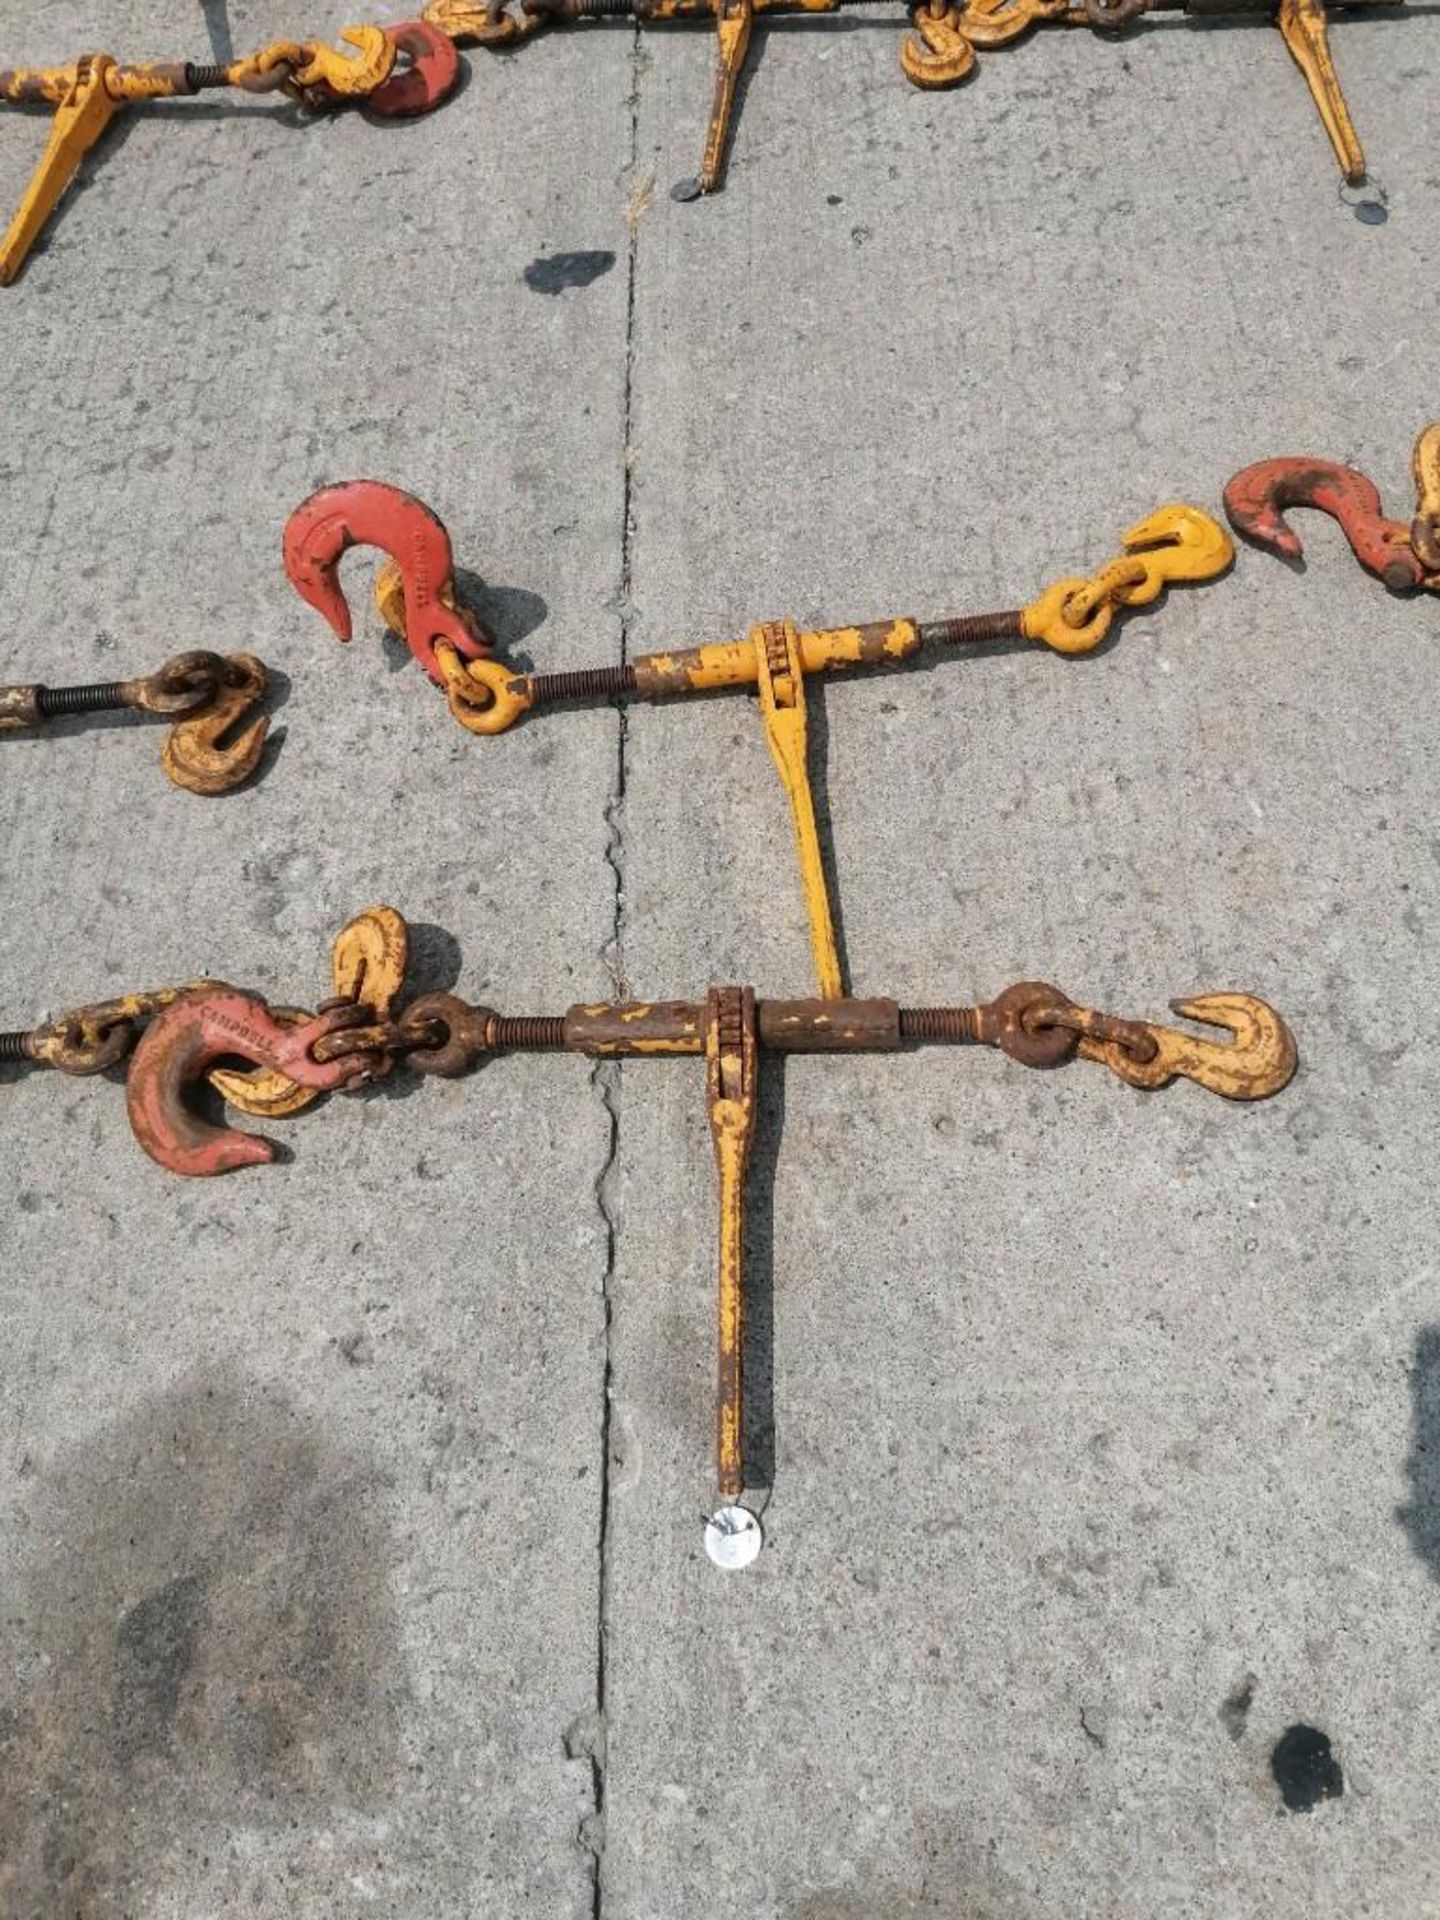 (6) Ratchet Load Binder 13000 pounds Double hooked. Located at 301 E Henry Street, Mt. Pleasant, - Image 3 of 4